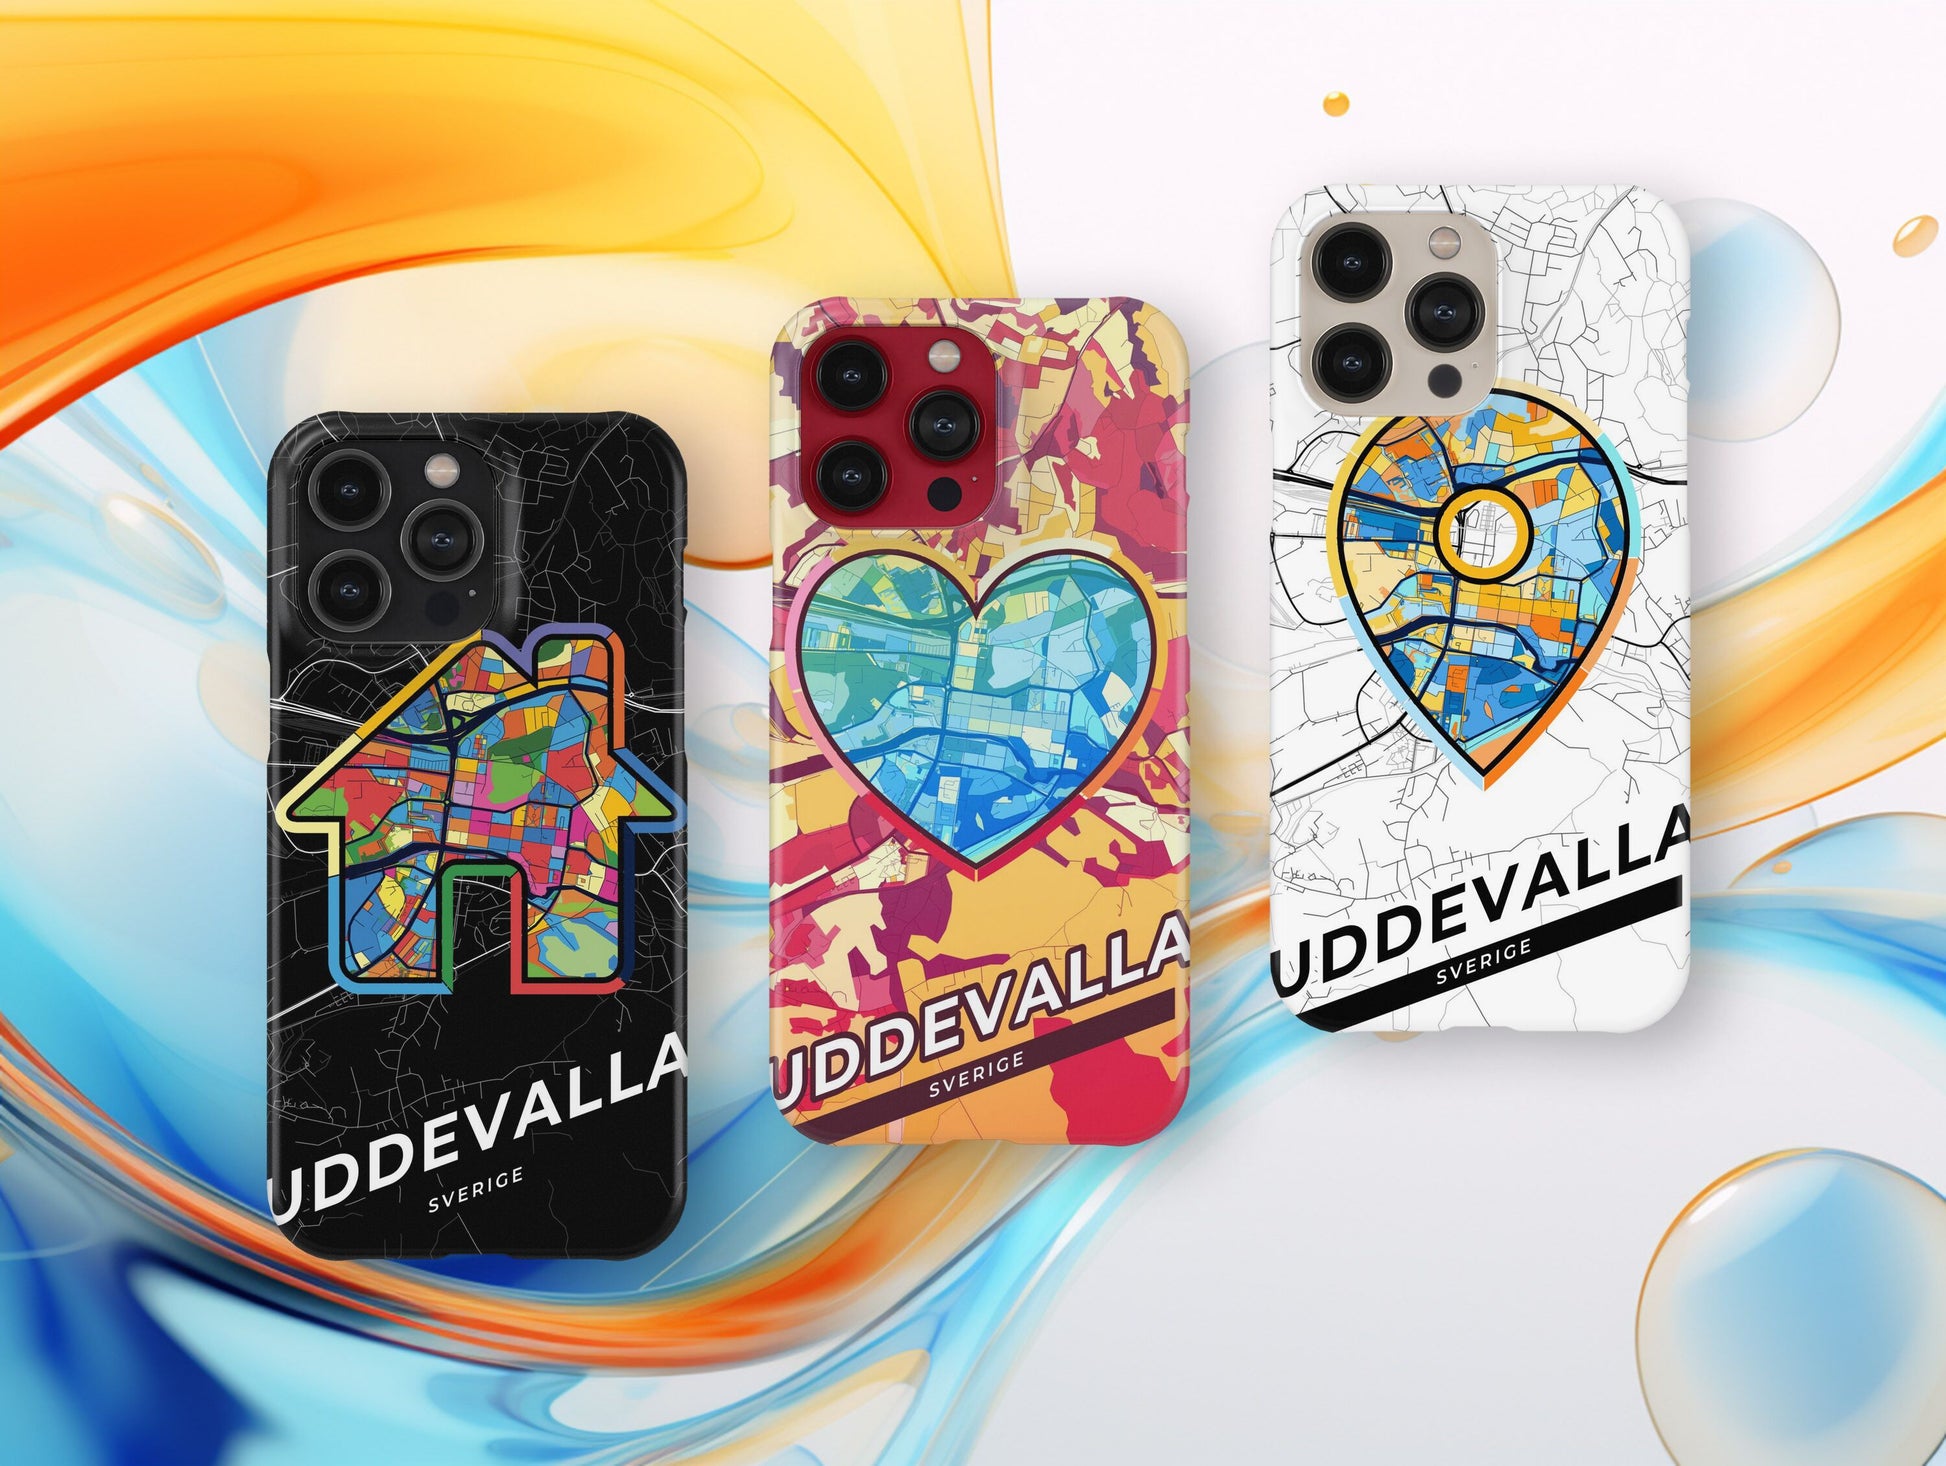 Uddevalla Sweden slim phone case with colorful icon. Birthday, wedding or housewarming gift. Couple match cases.